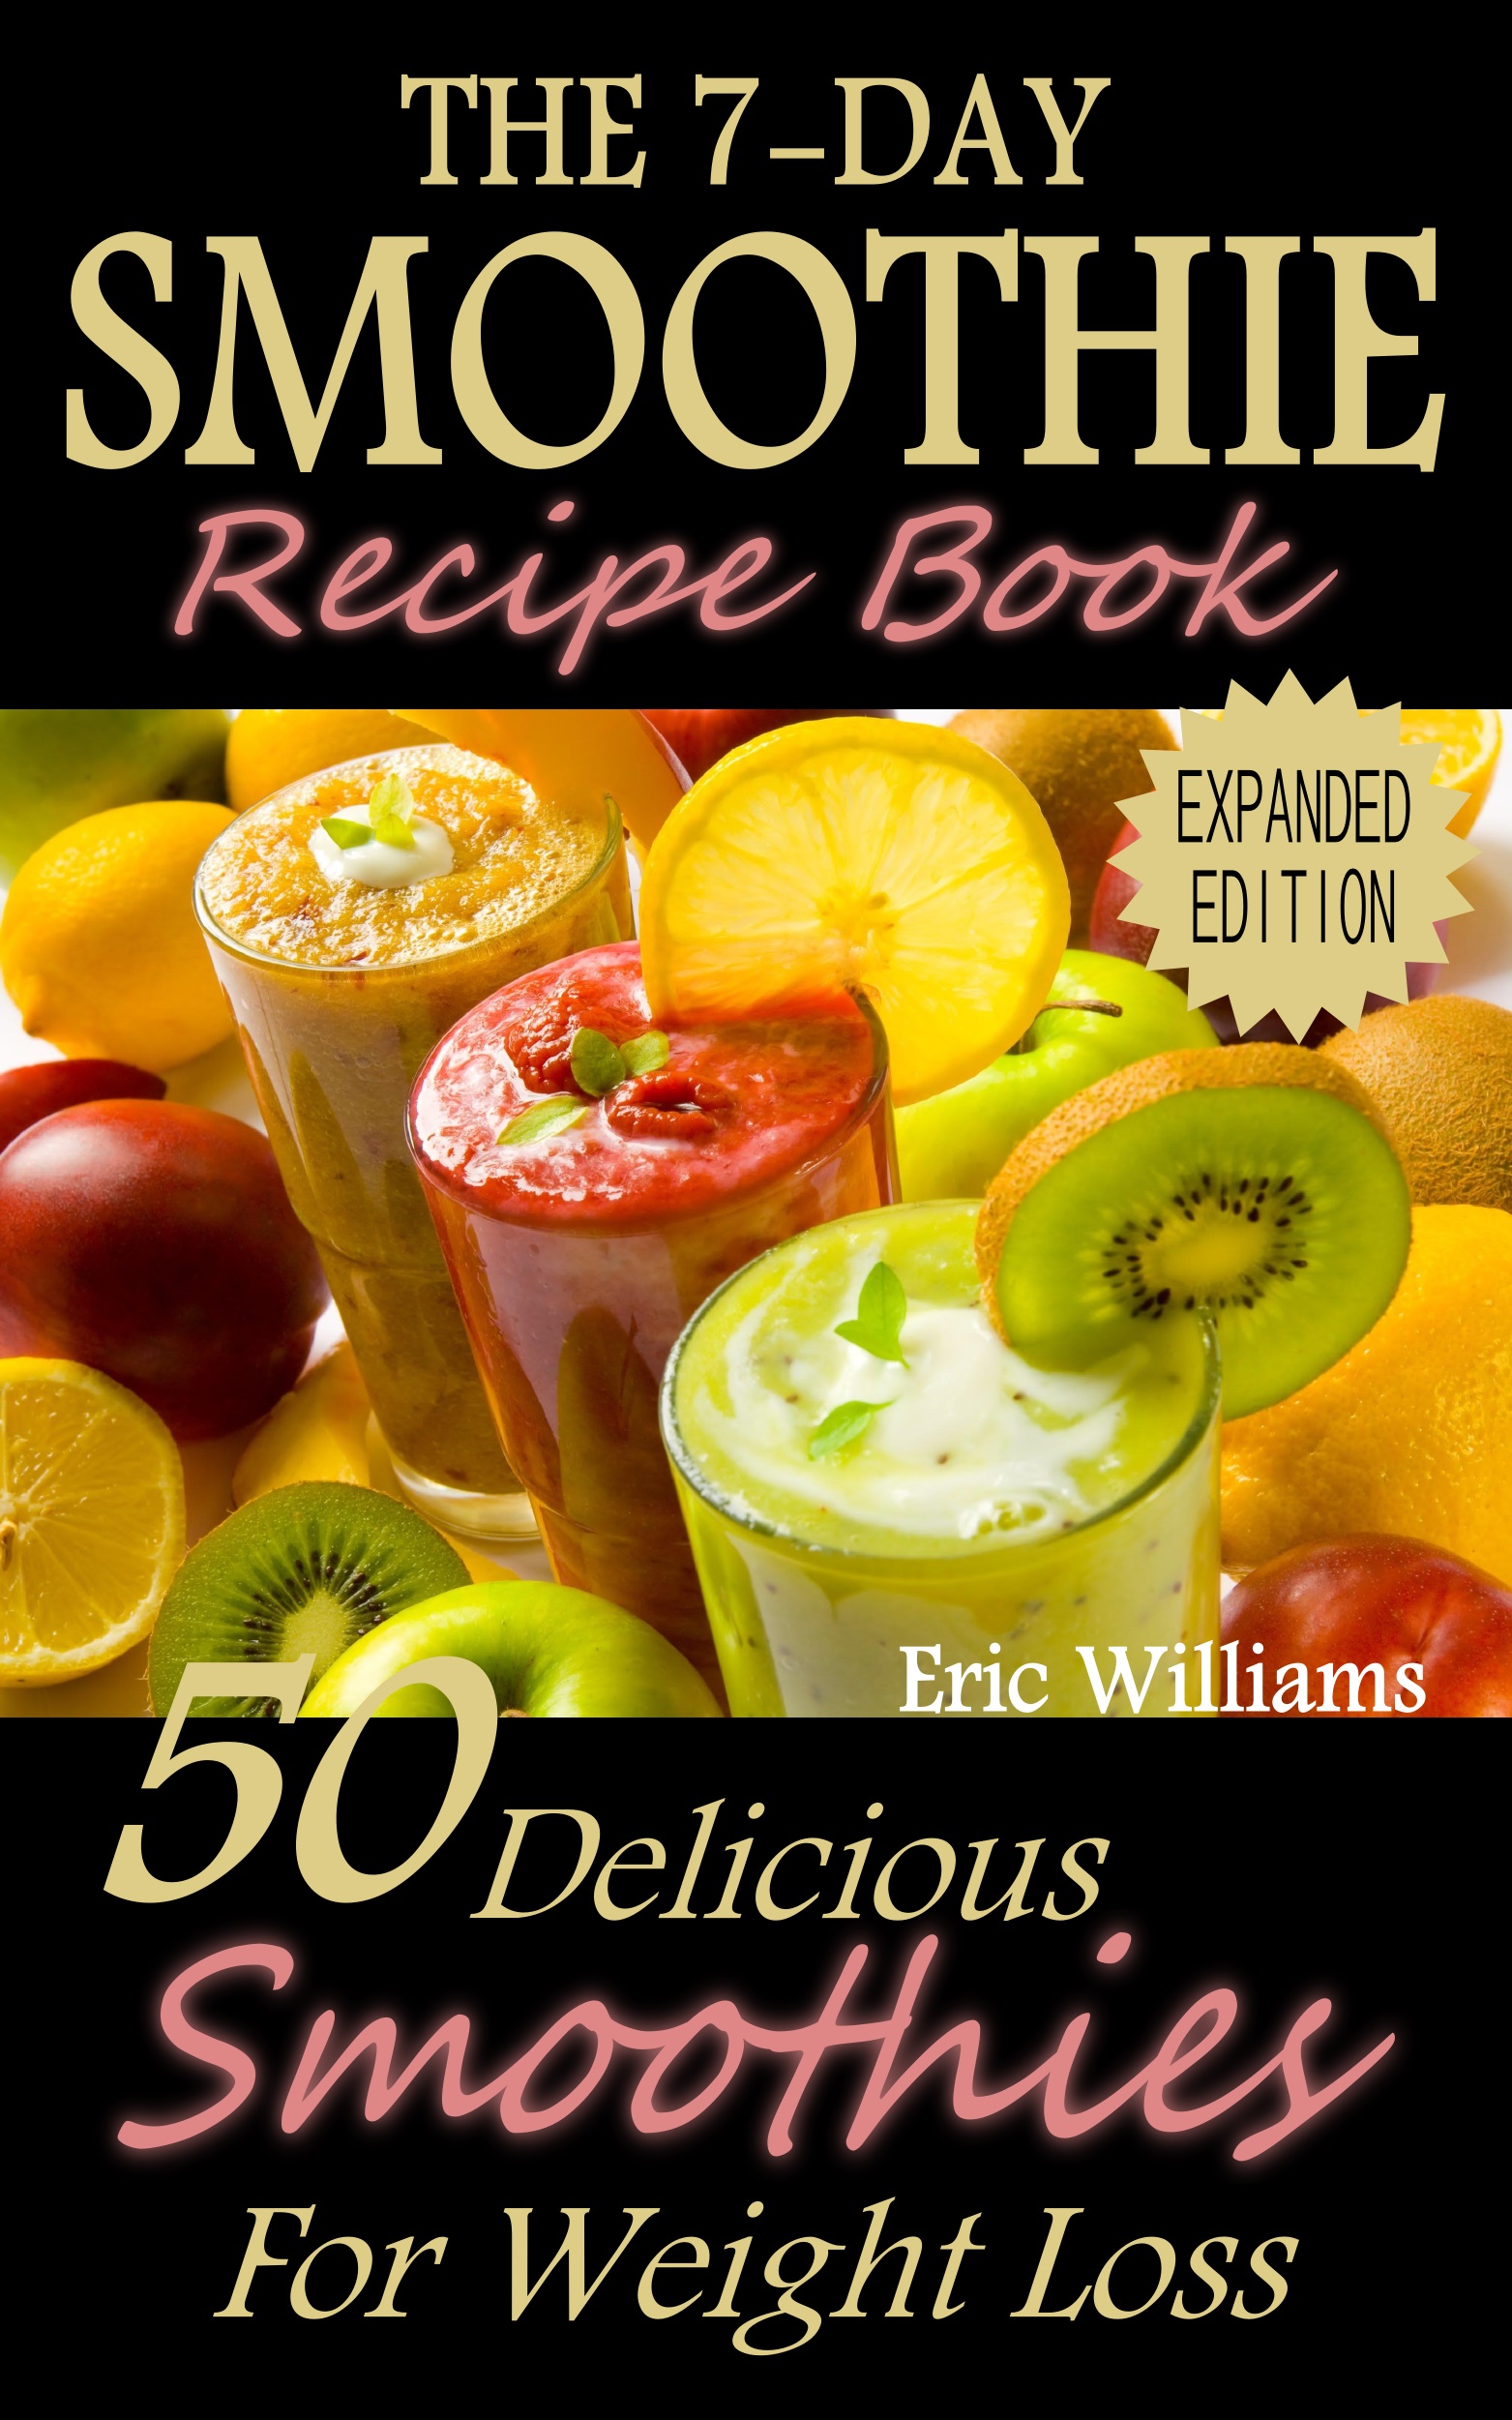 FREE: The 7-Day Smoothie Recipe Book: 50 Delicious Smoothies For Weight Loss by Eric Williams